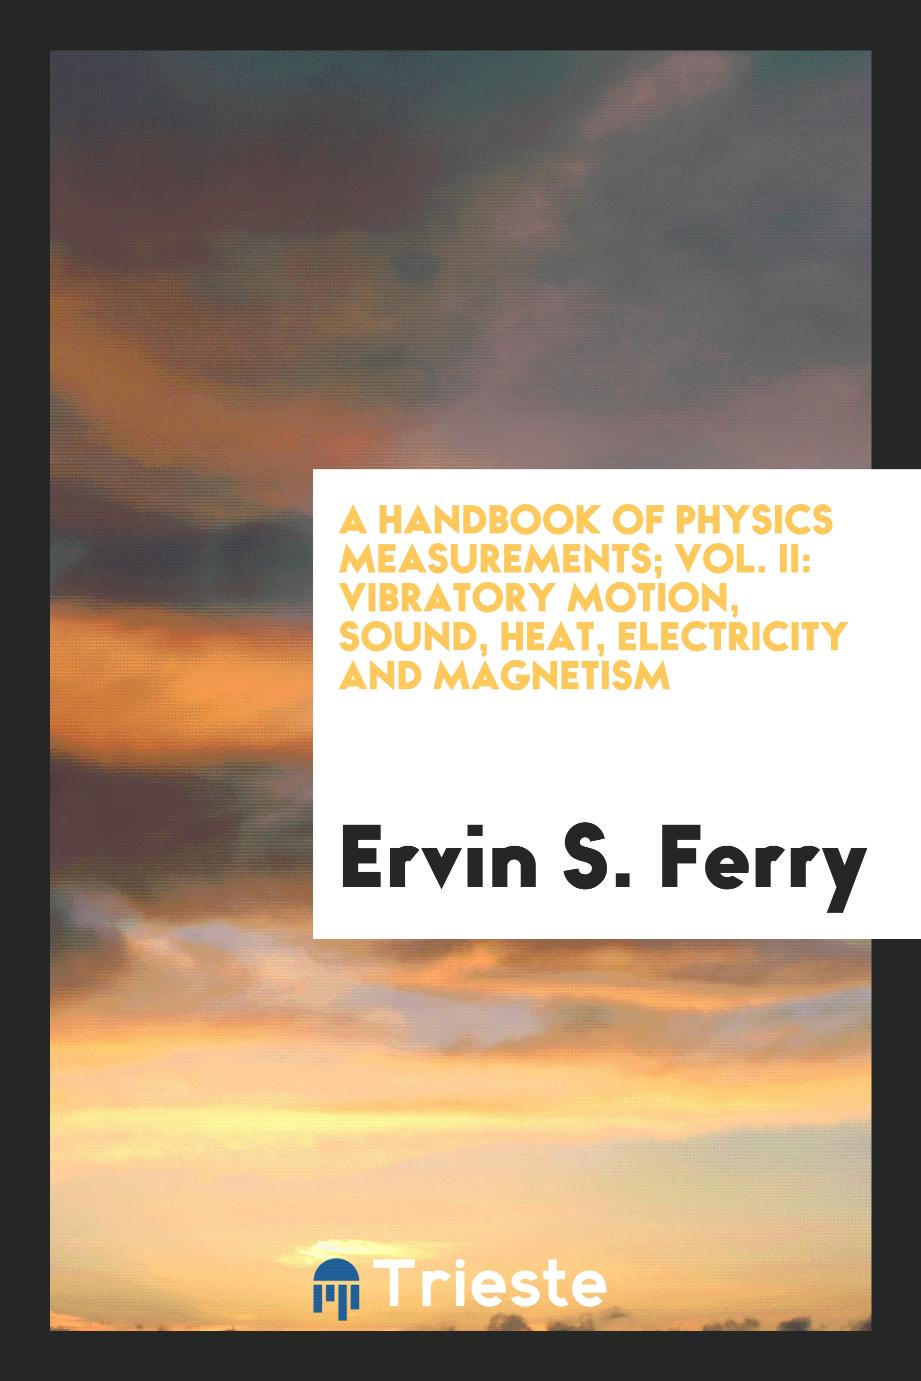 A handbook of physics measurements; Vol. II: Vibratory motion, sound, heat, electricity and magnetism